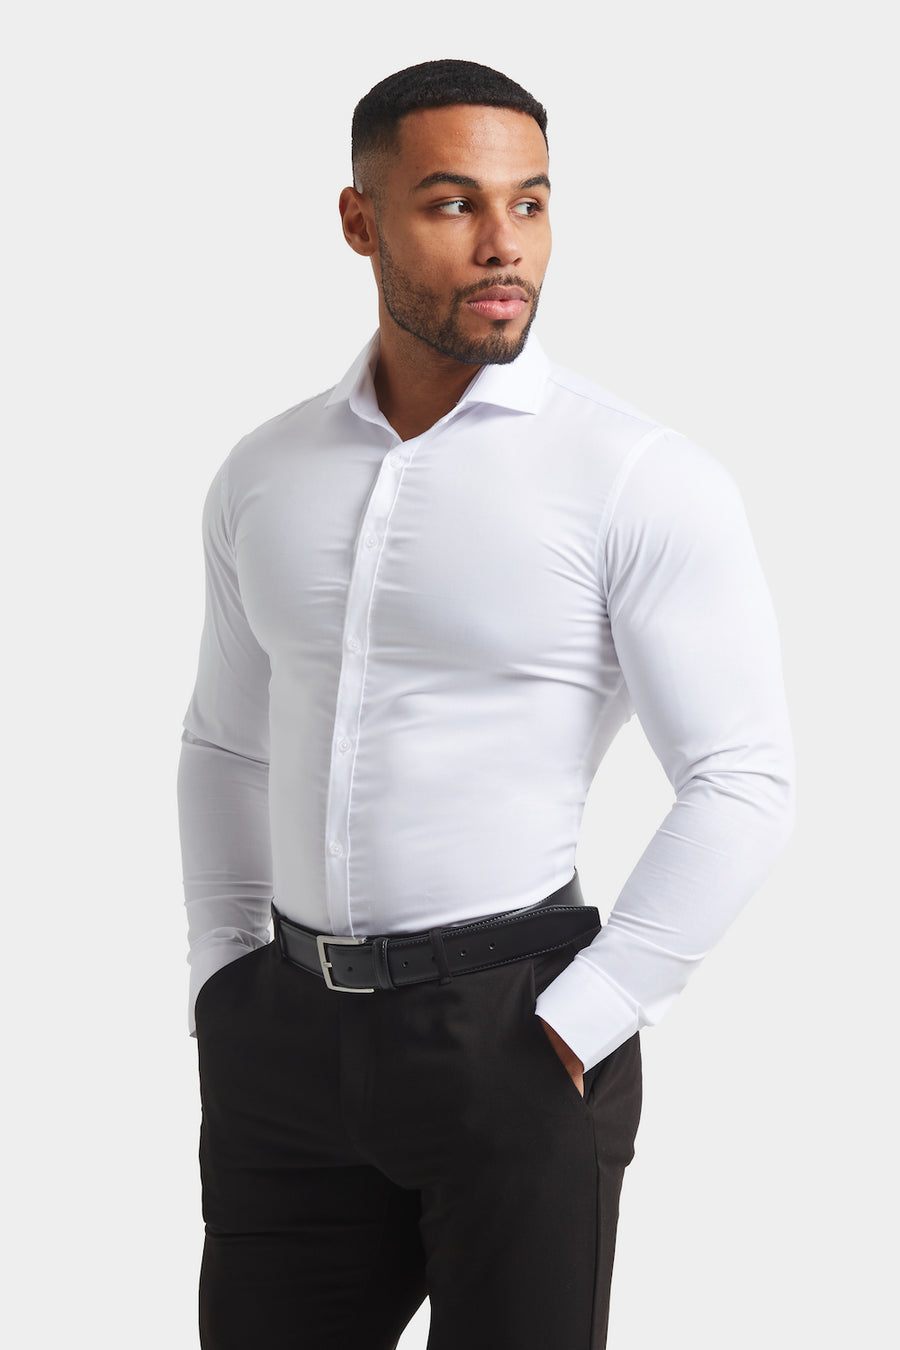 Athletic Fit Cutaway Collar Shirt in White - TAILORED ATHLETE - USA